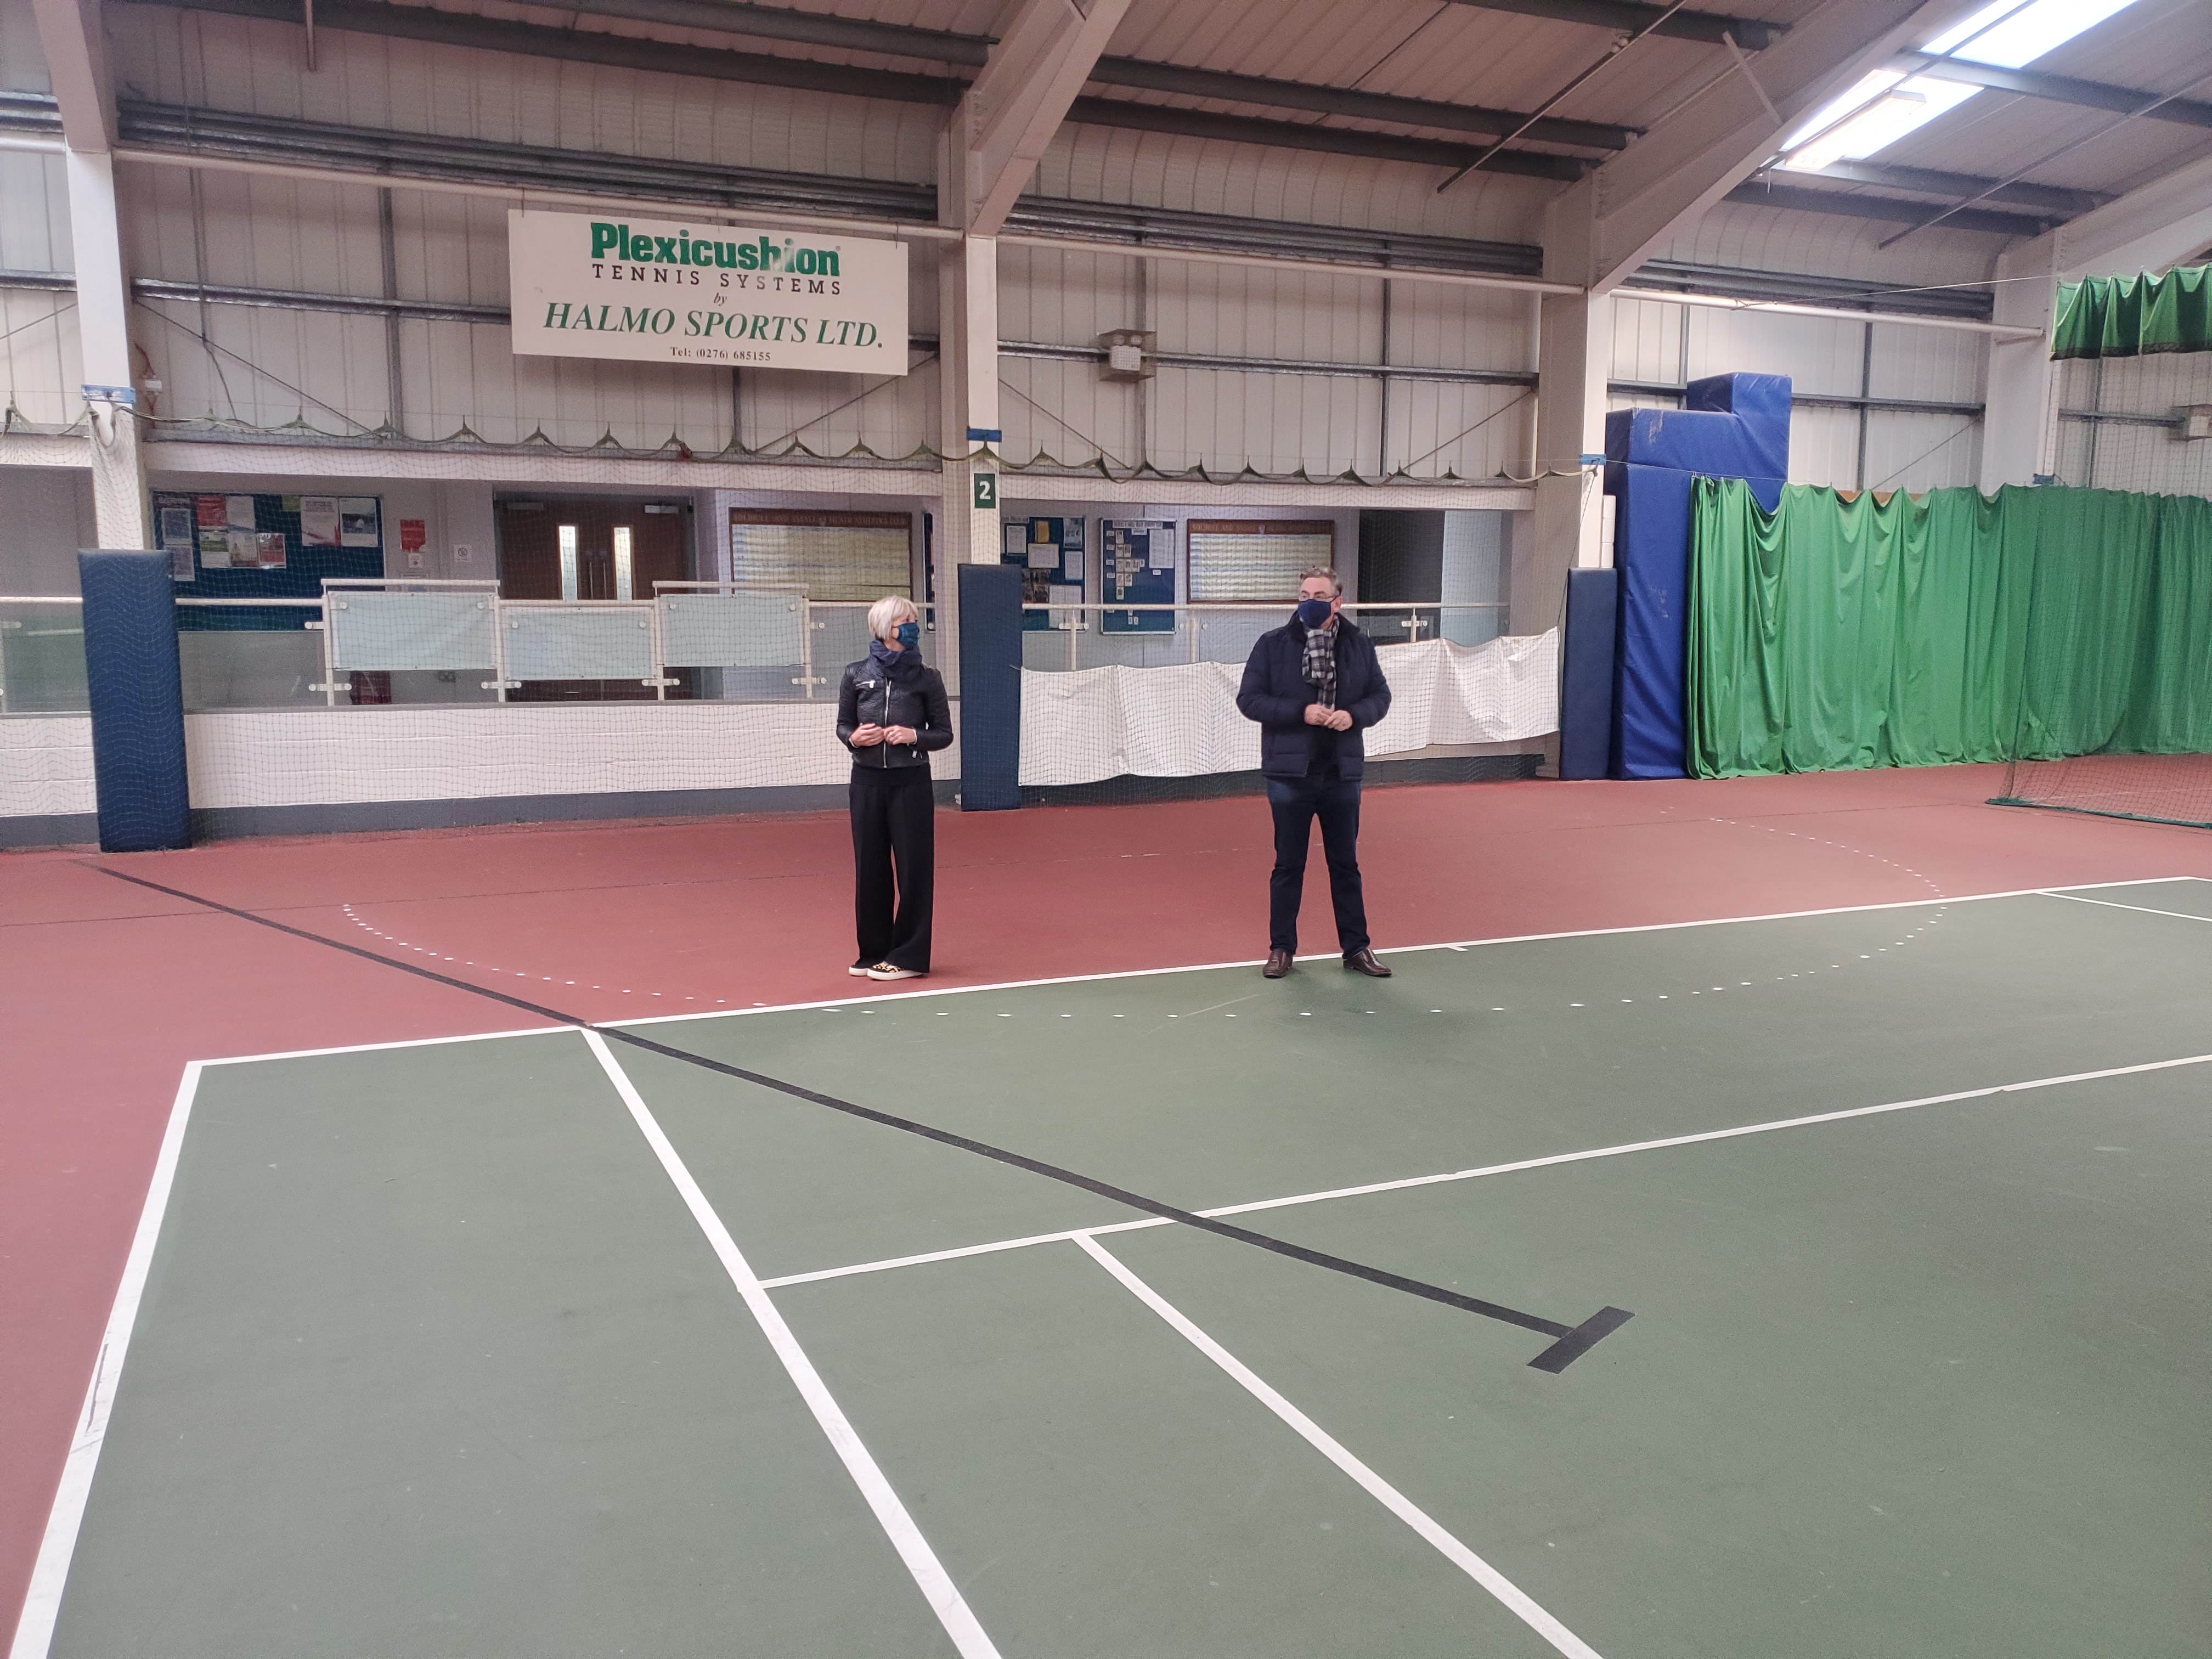 Julian Knight MP, right, visited a tennis centre in his consistency last week